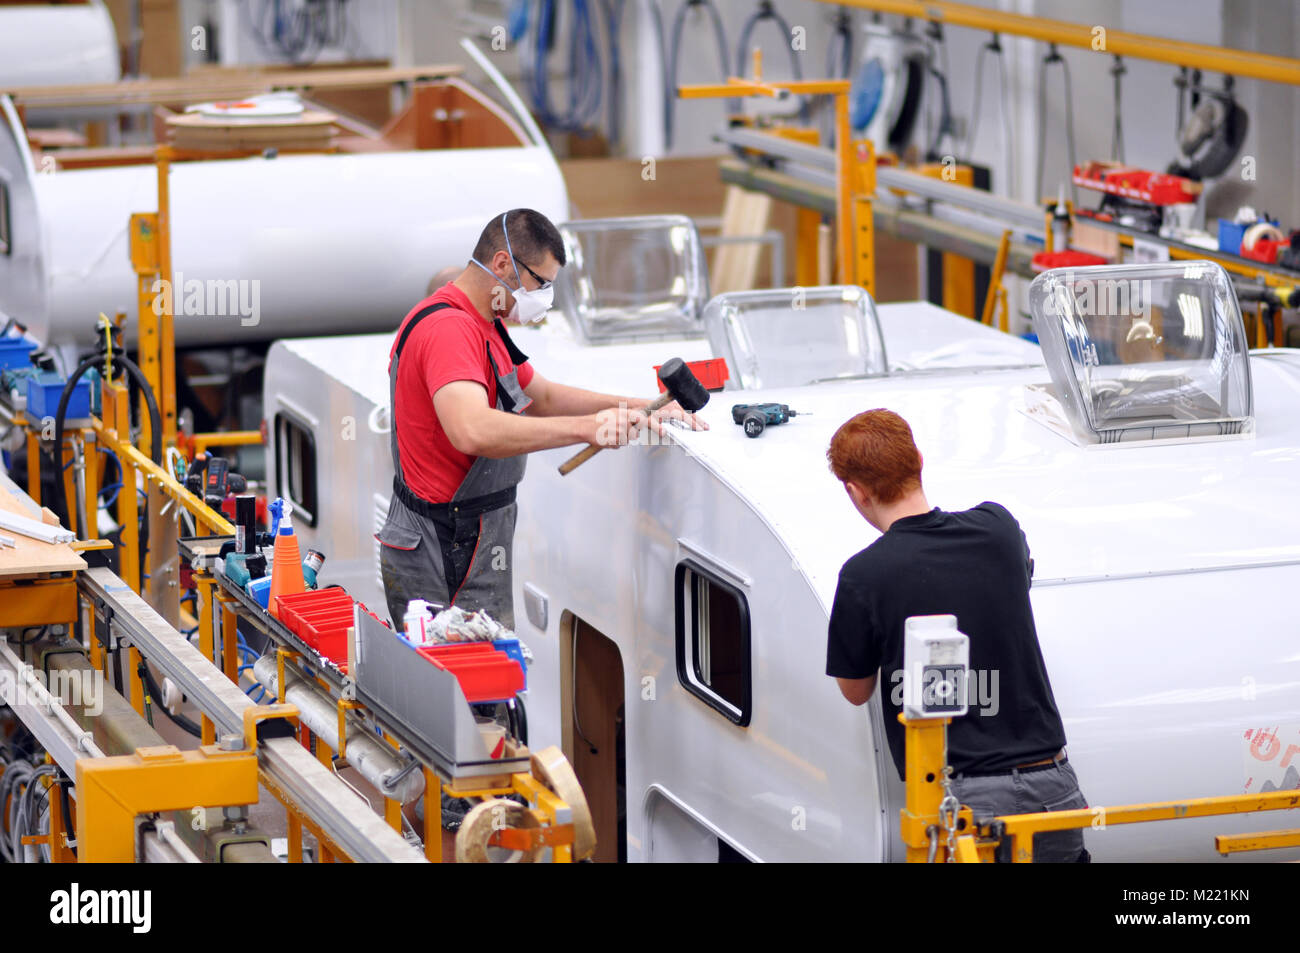 manufacture of camper vans in a factory Stock Photo